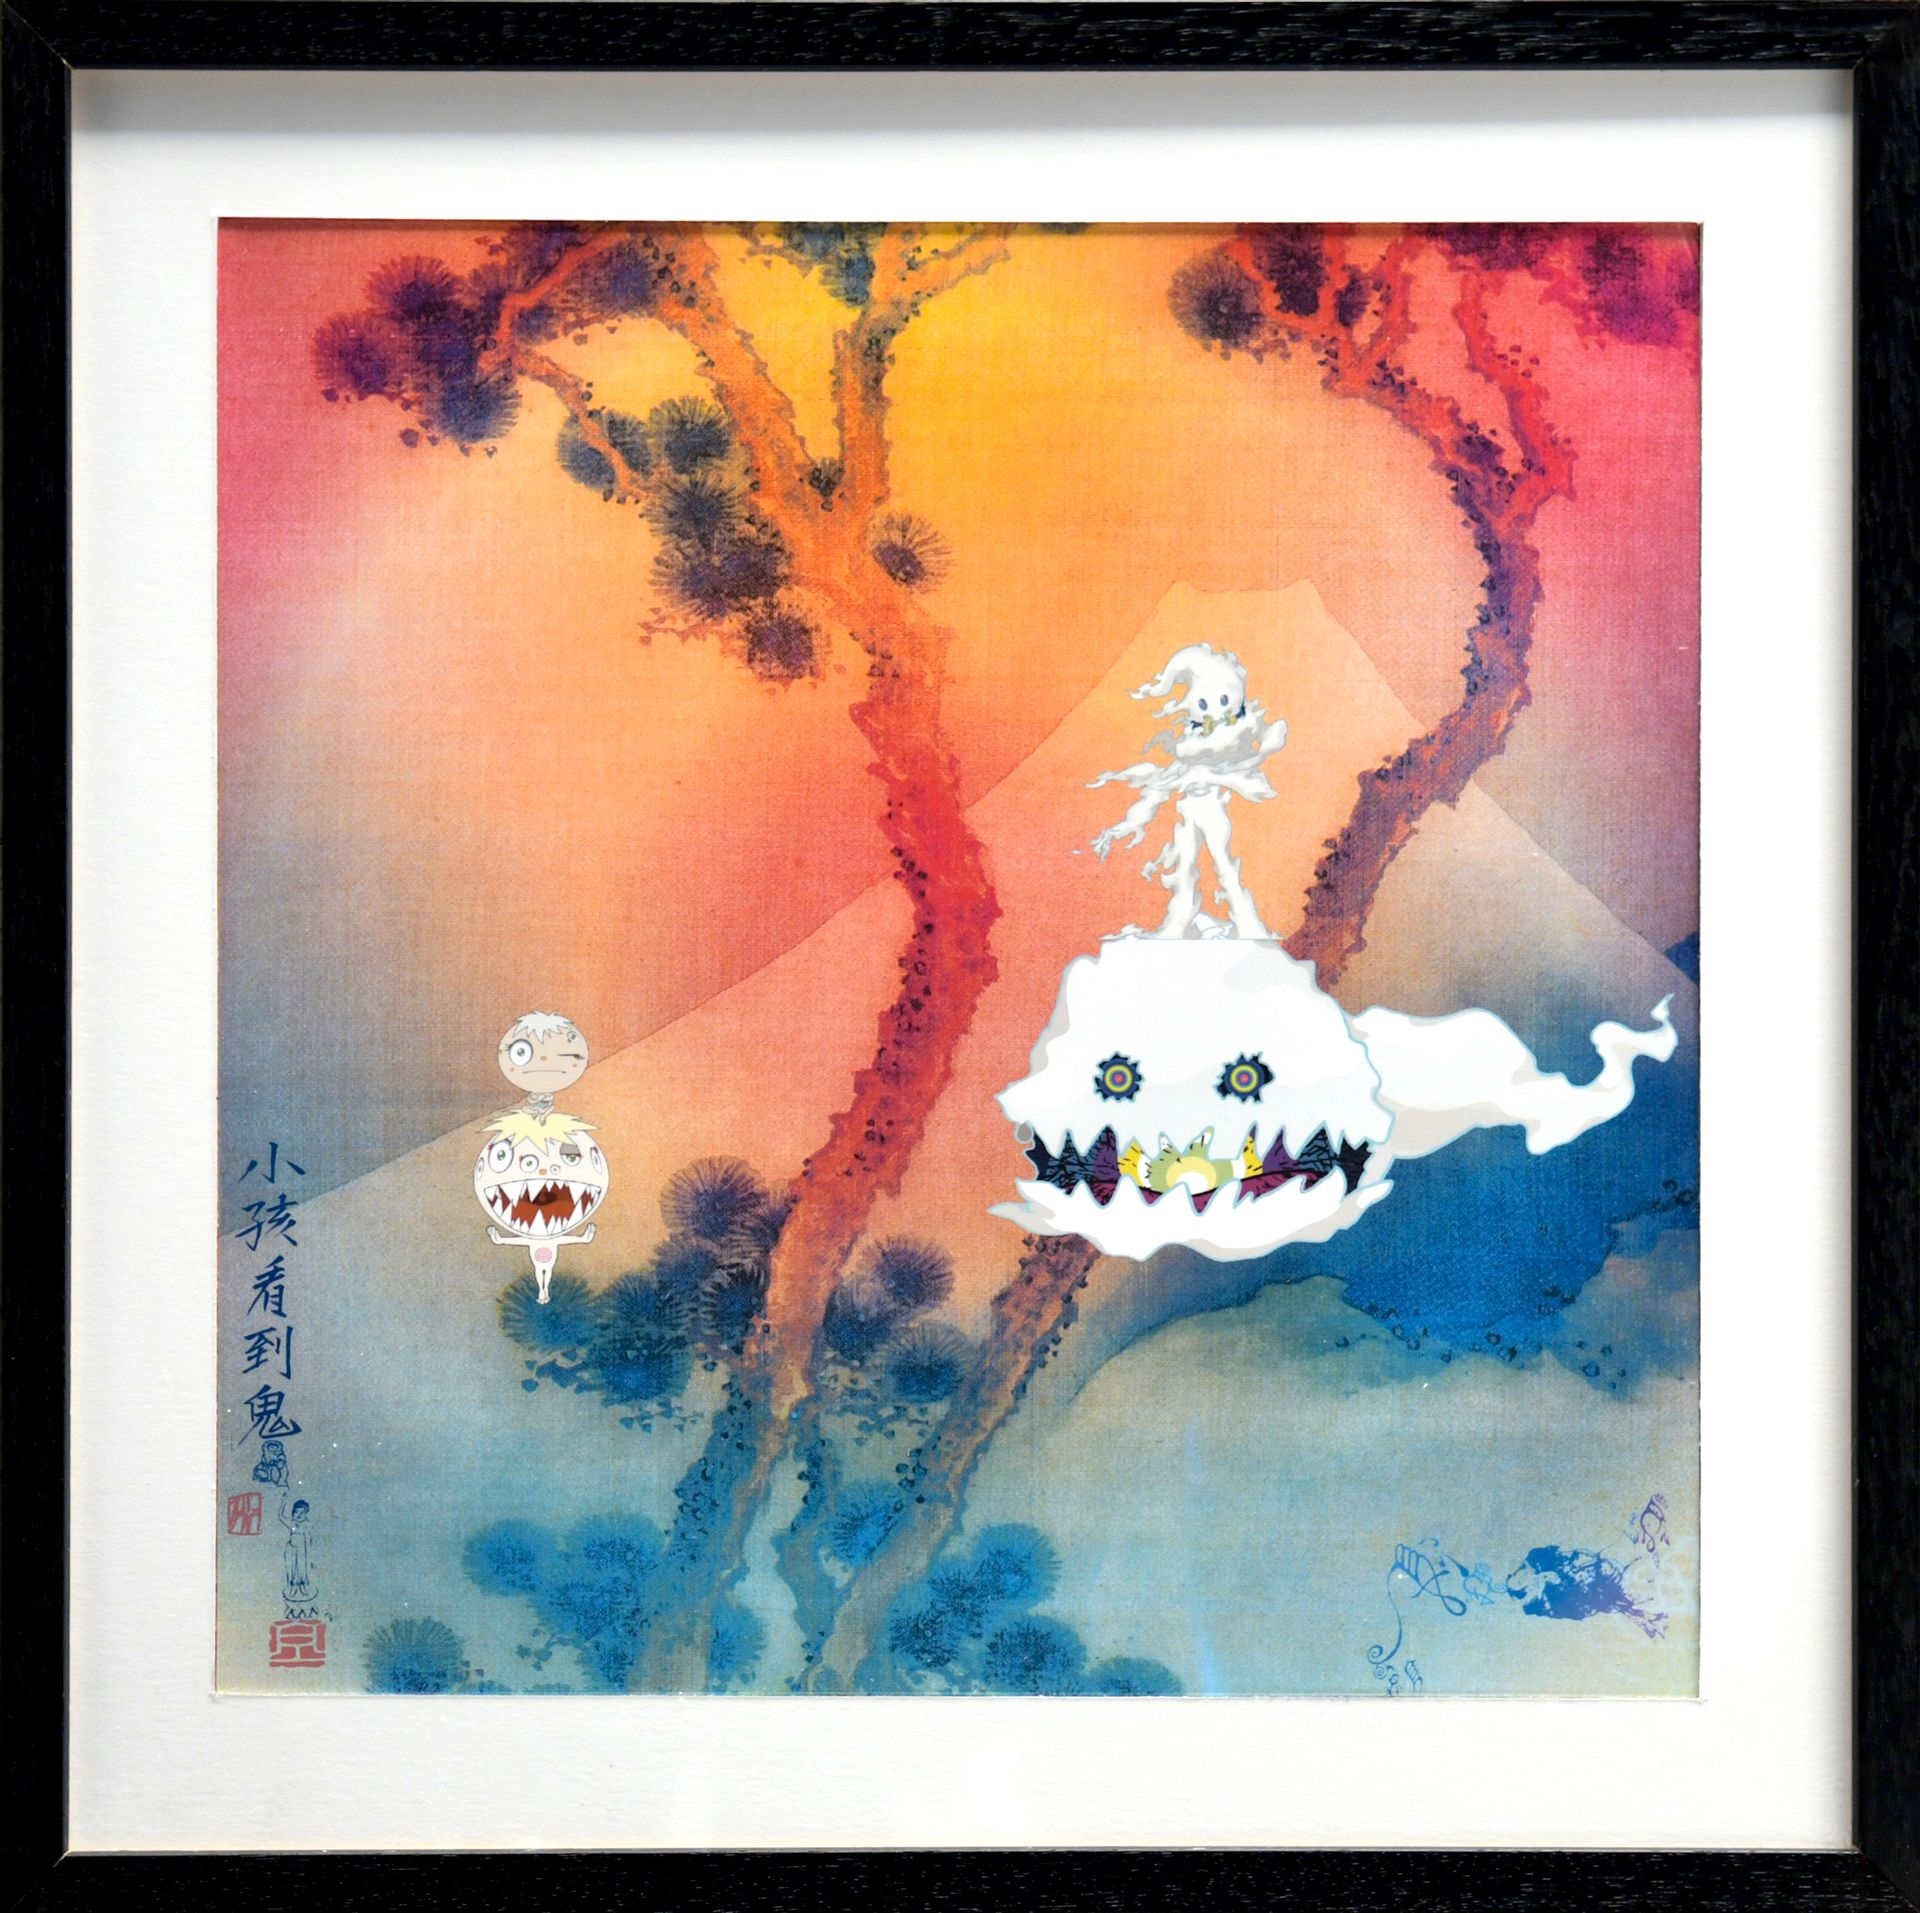 Can Kids See Ghosts?